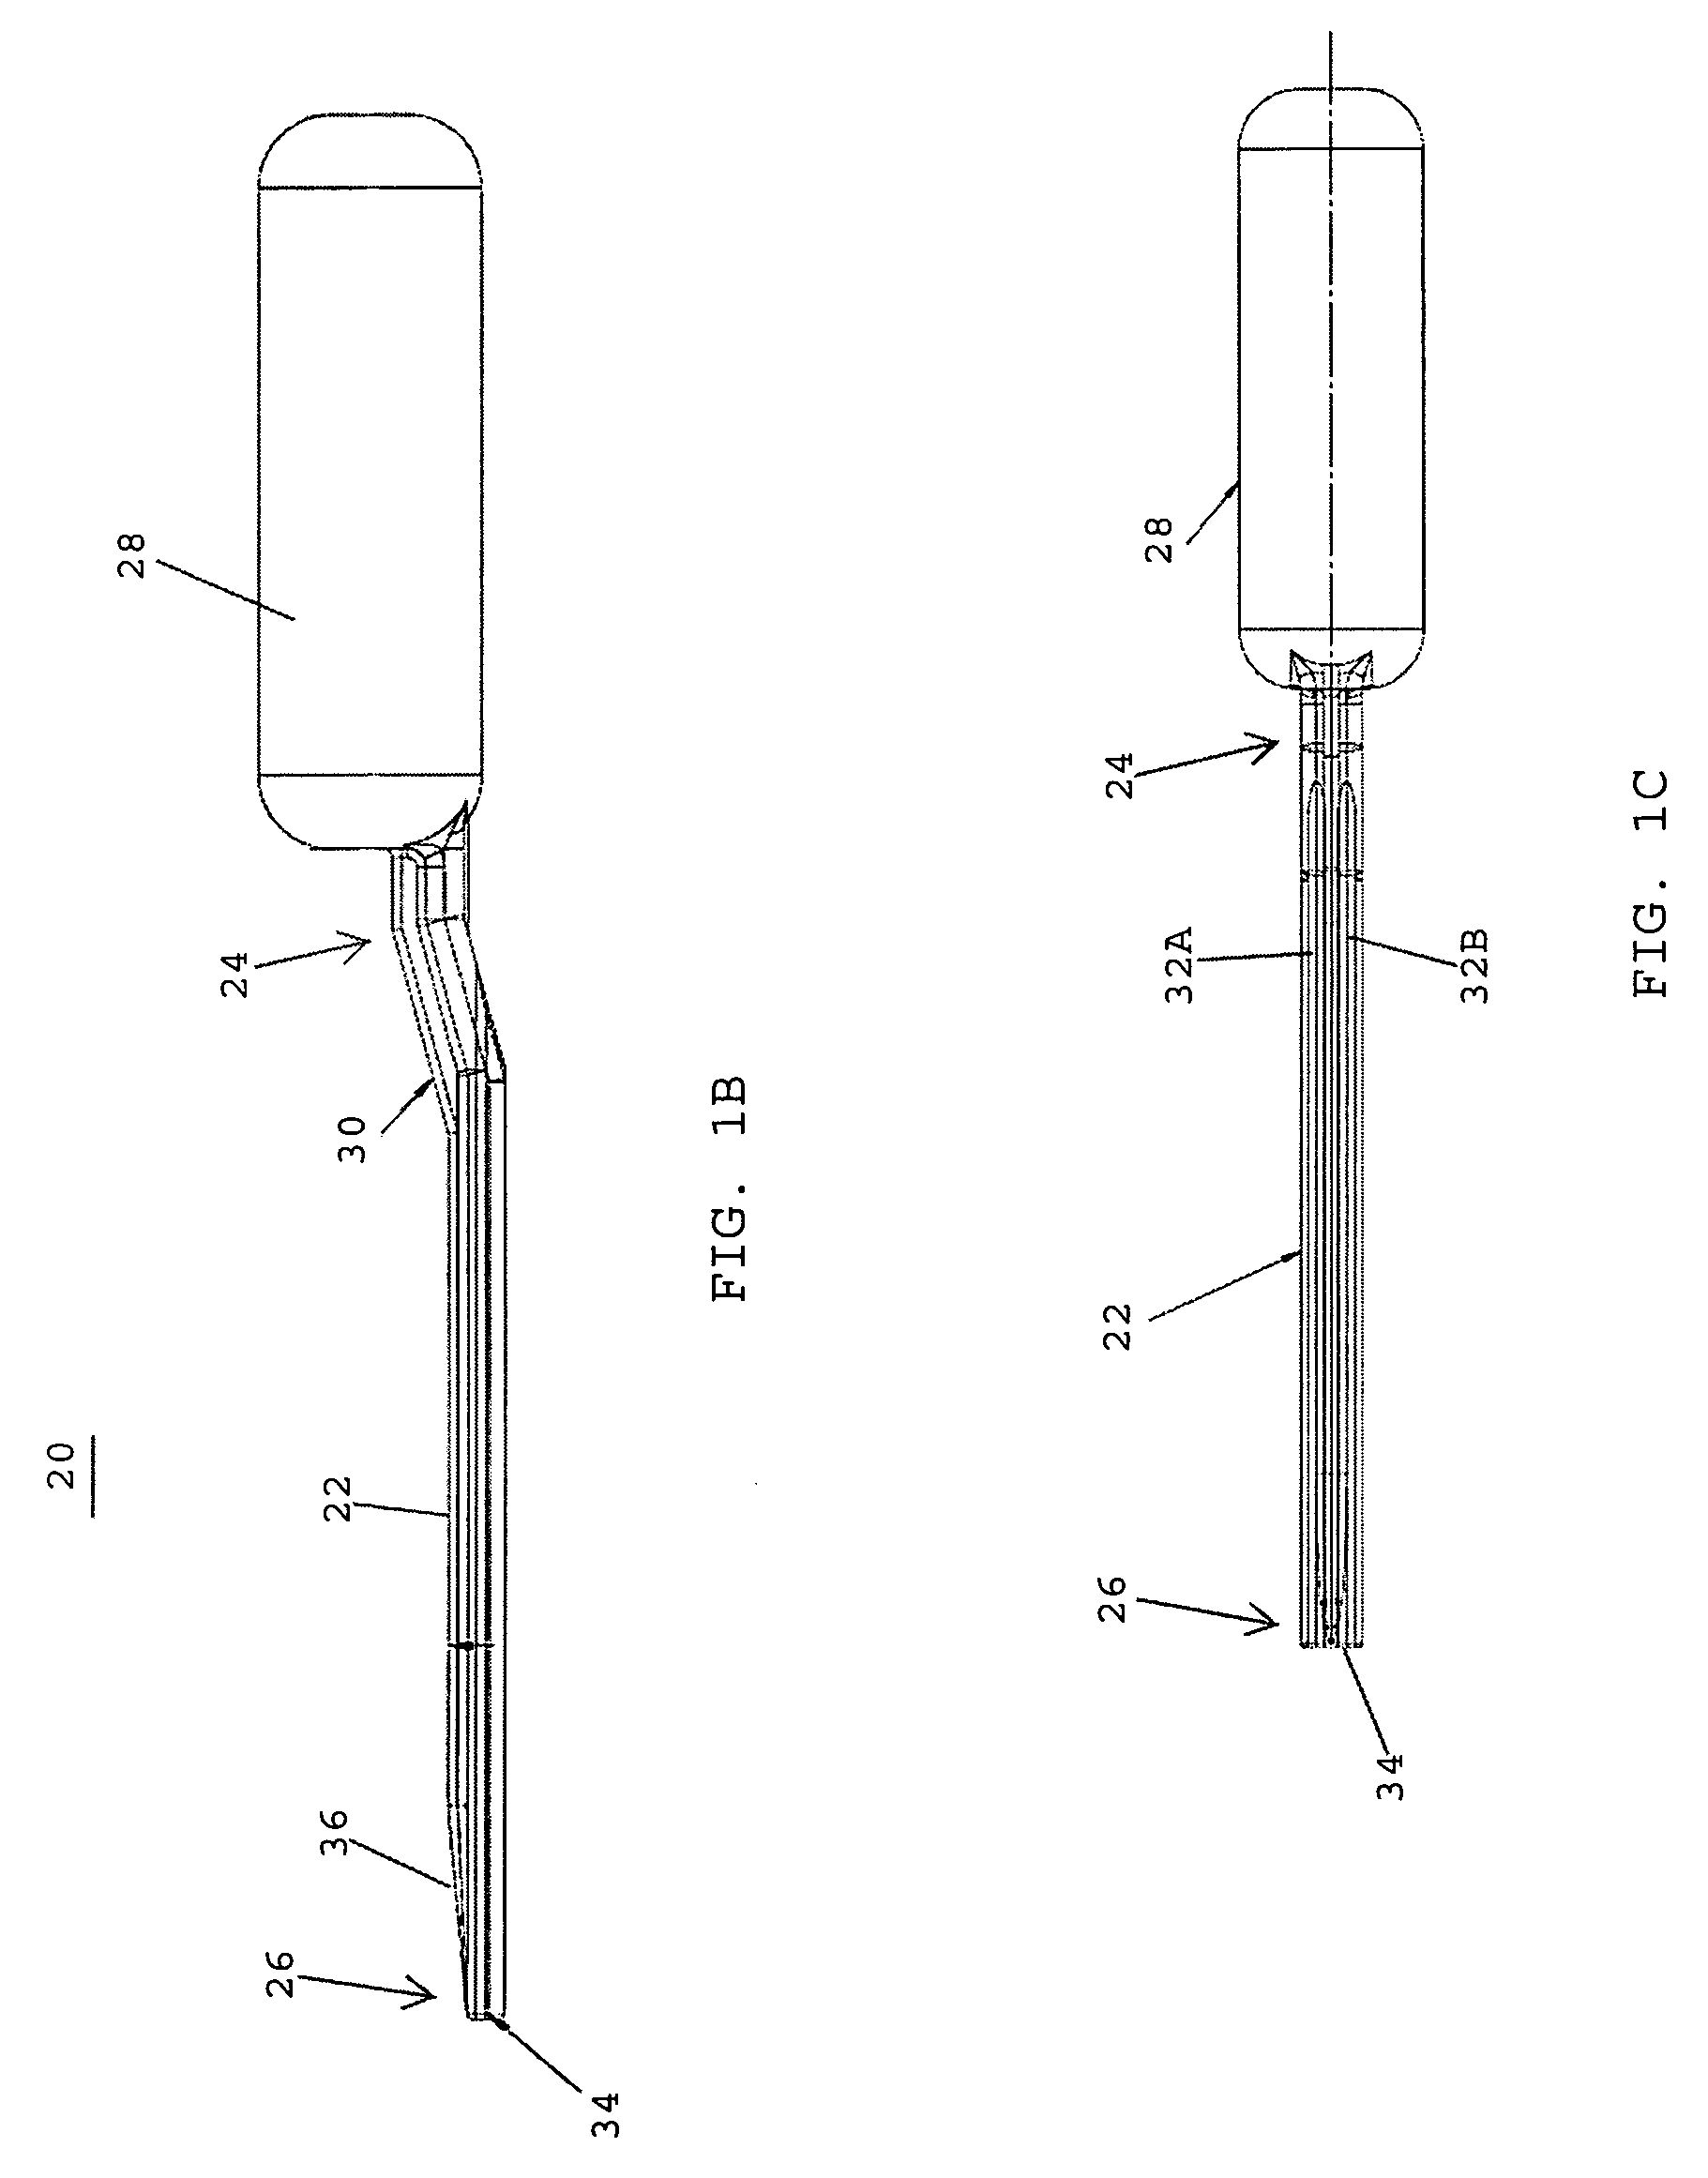 Devices for tensioning barbed sutures and methods therefor